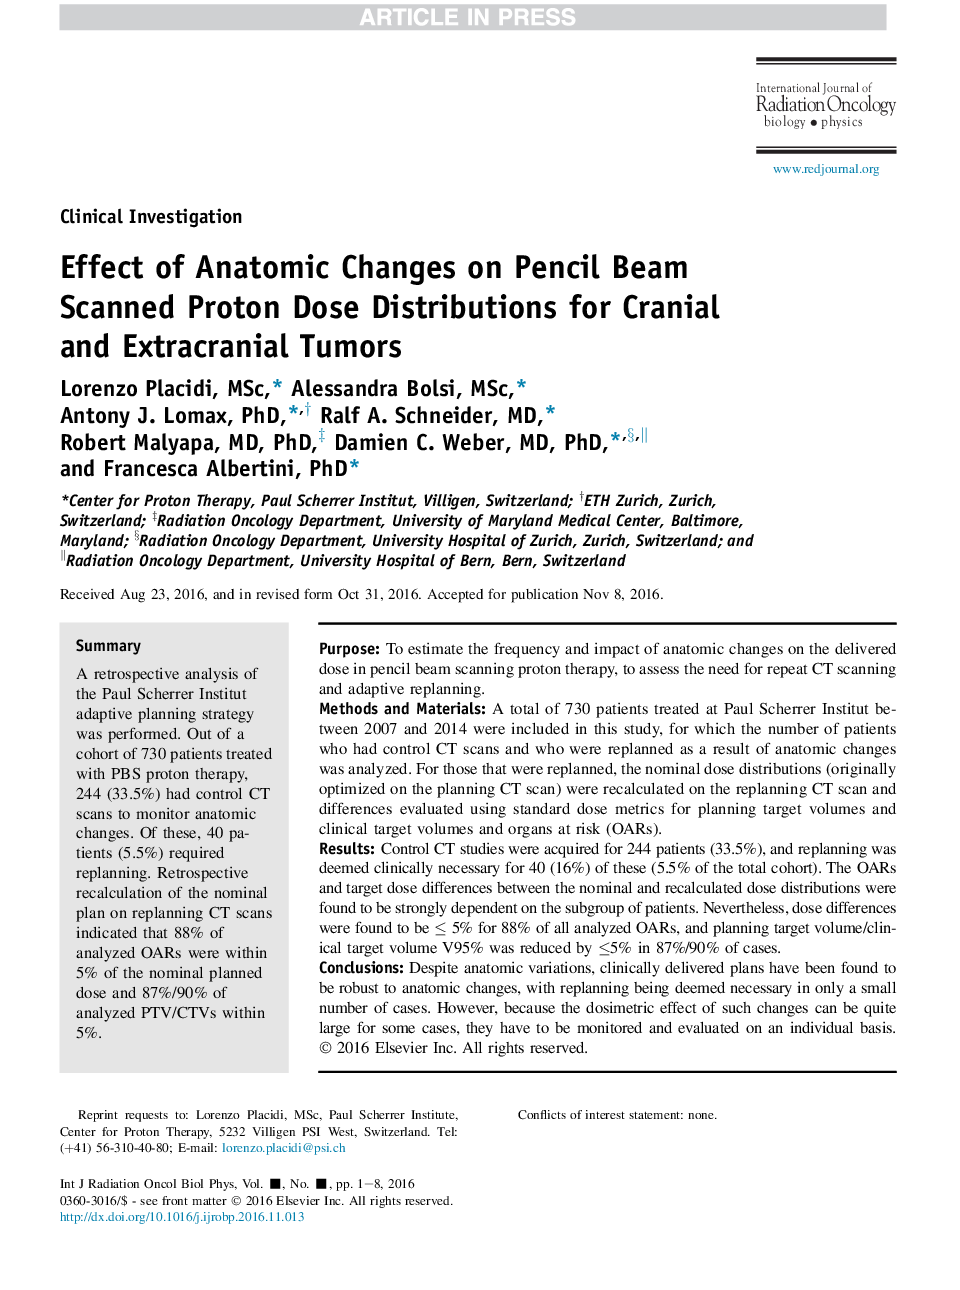 Effect of Anatomic Changes on Pencil Beam Scanned Proton Dose Distributions for Cranial and Extracranial Tumors